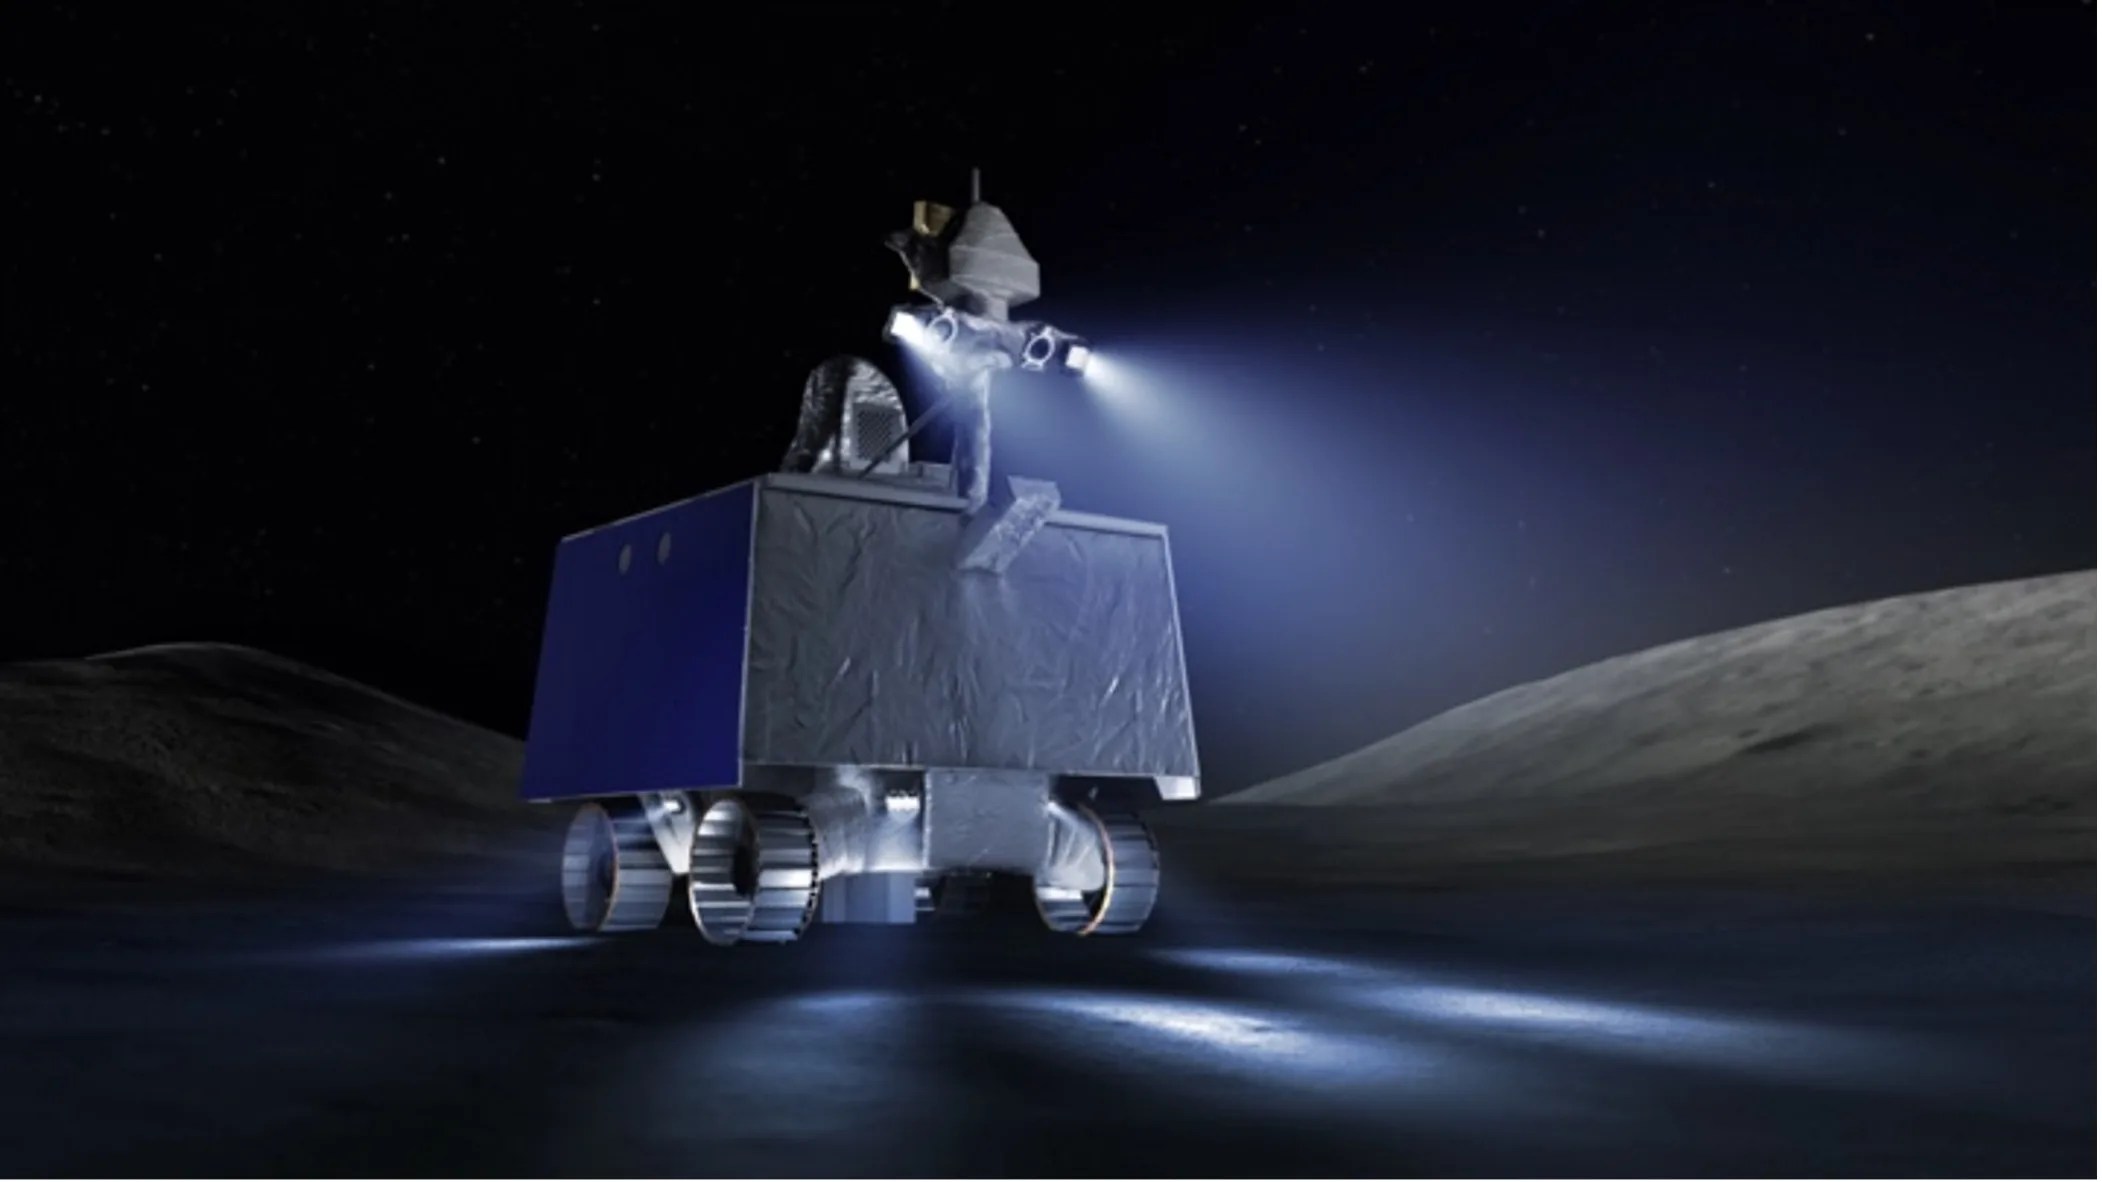 The image shows a graphic illustration of the rover known as VIPER. It is mostly grey with blue siding and the central structure is box-like. Four wheels are underneath the rover, which will help it traverse the lunar south pole. Mounted on top of the rover are a couple of additional small structures as well as lights that will shine the way in permanently shadowed regions (PSRS). In the background is a simulation of the Moon’s surface surrounded by black space.